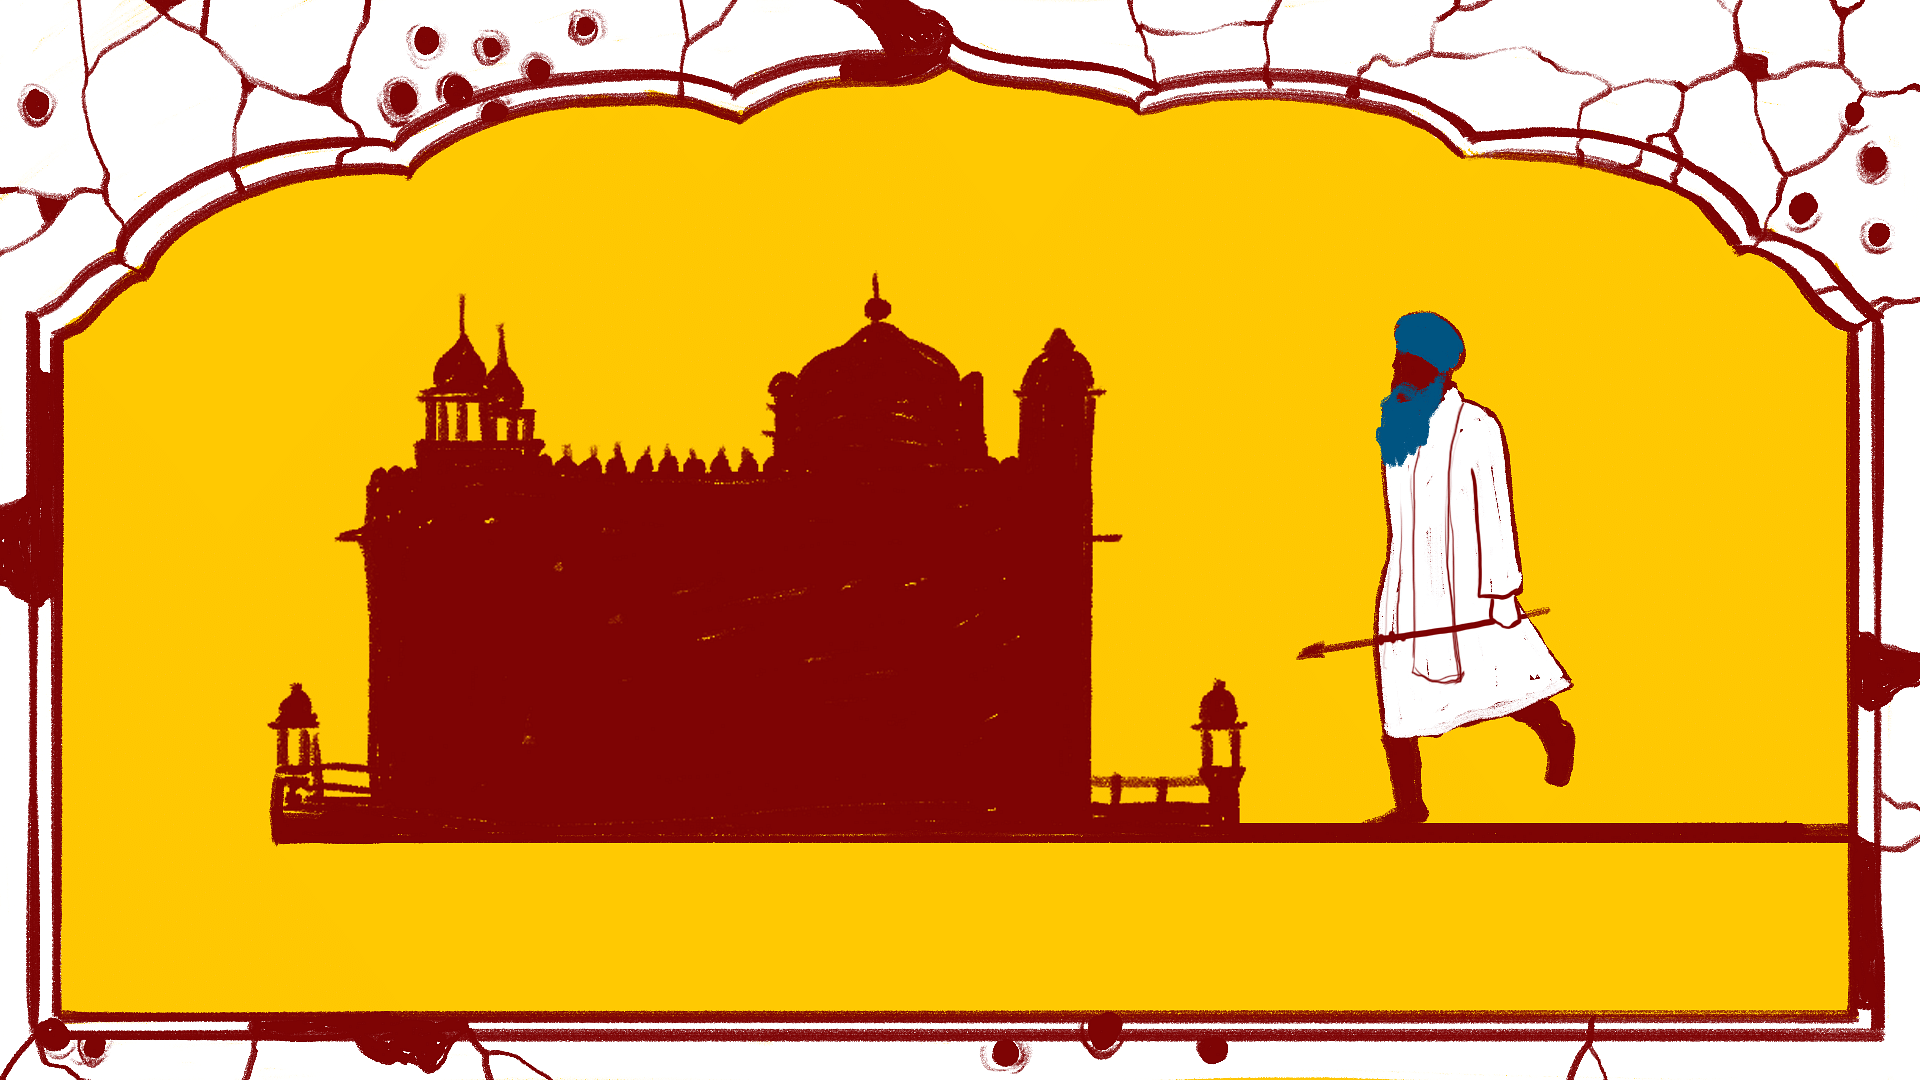 Remembering the events that necessitated Operation Bluestar, on the 37th anniversary of the military offensive. (Graphics: Susnata Paul/The Quint)